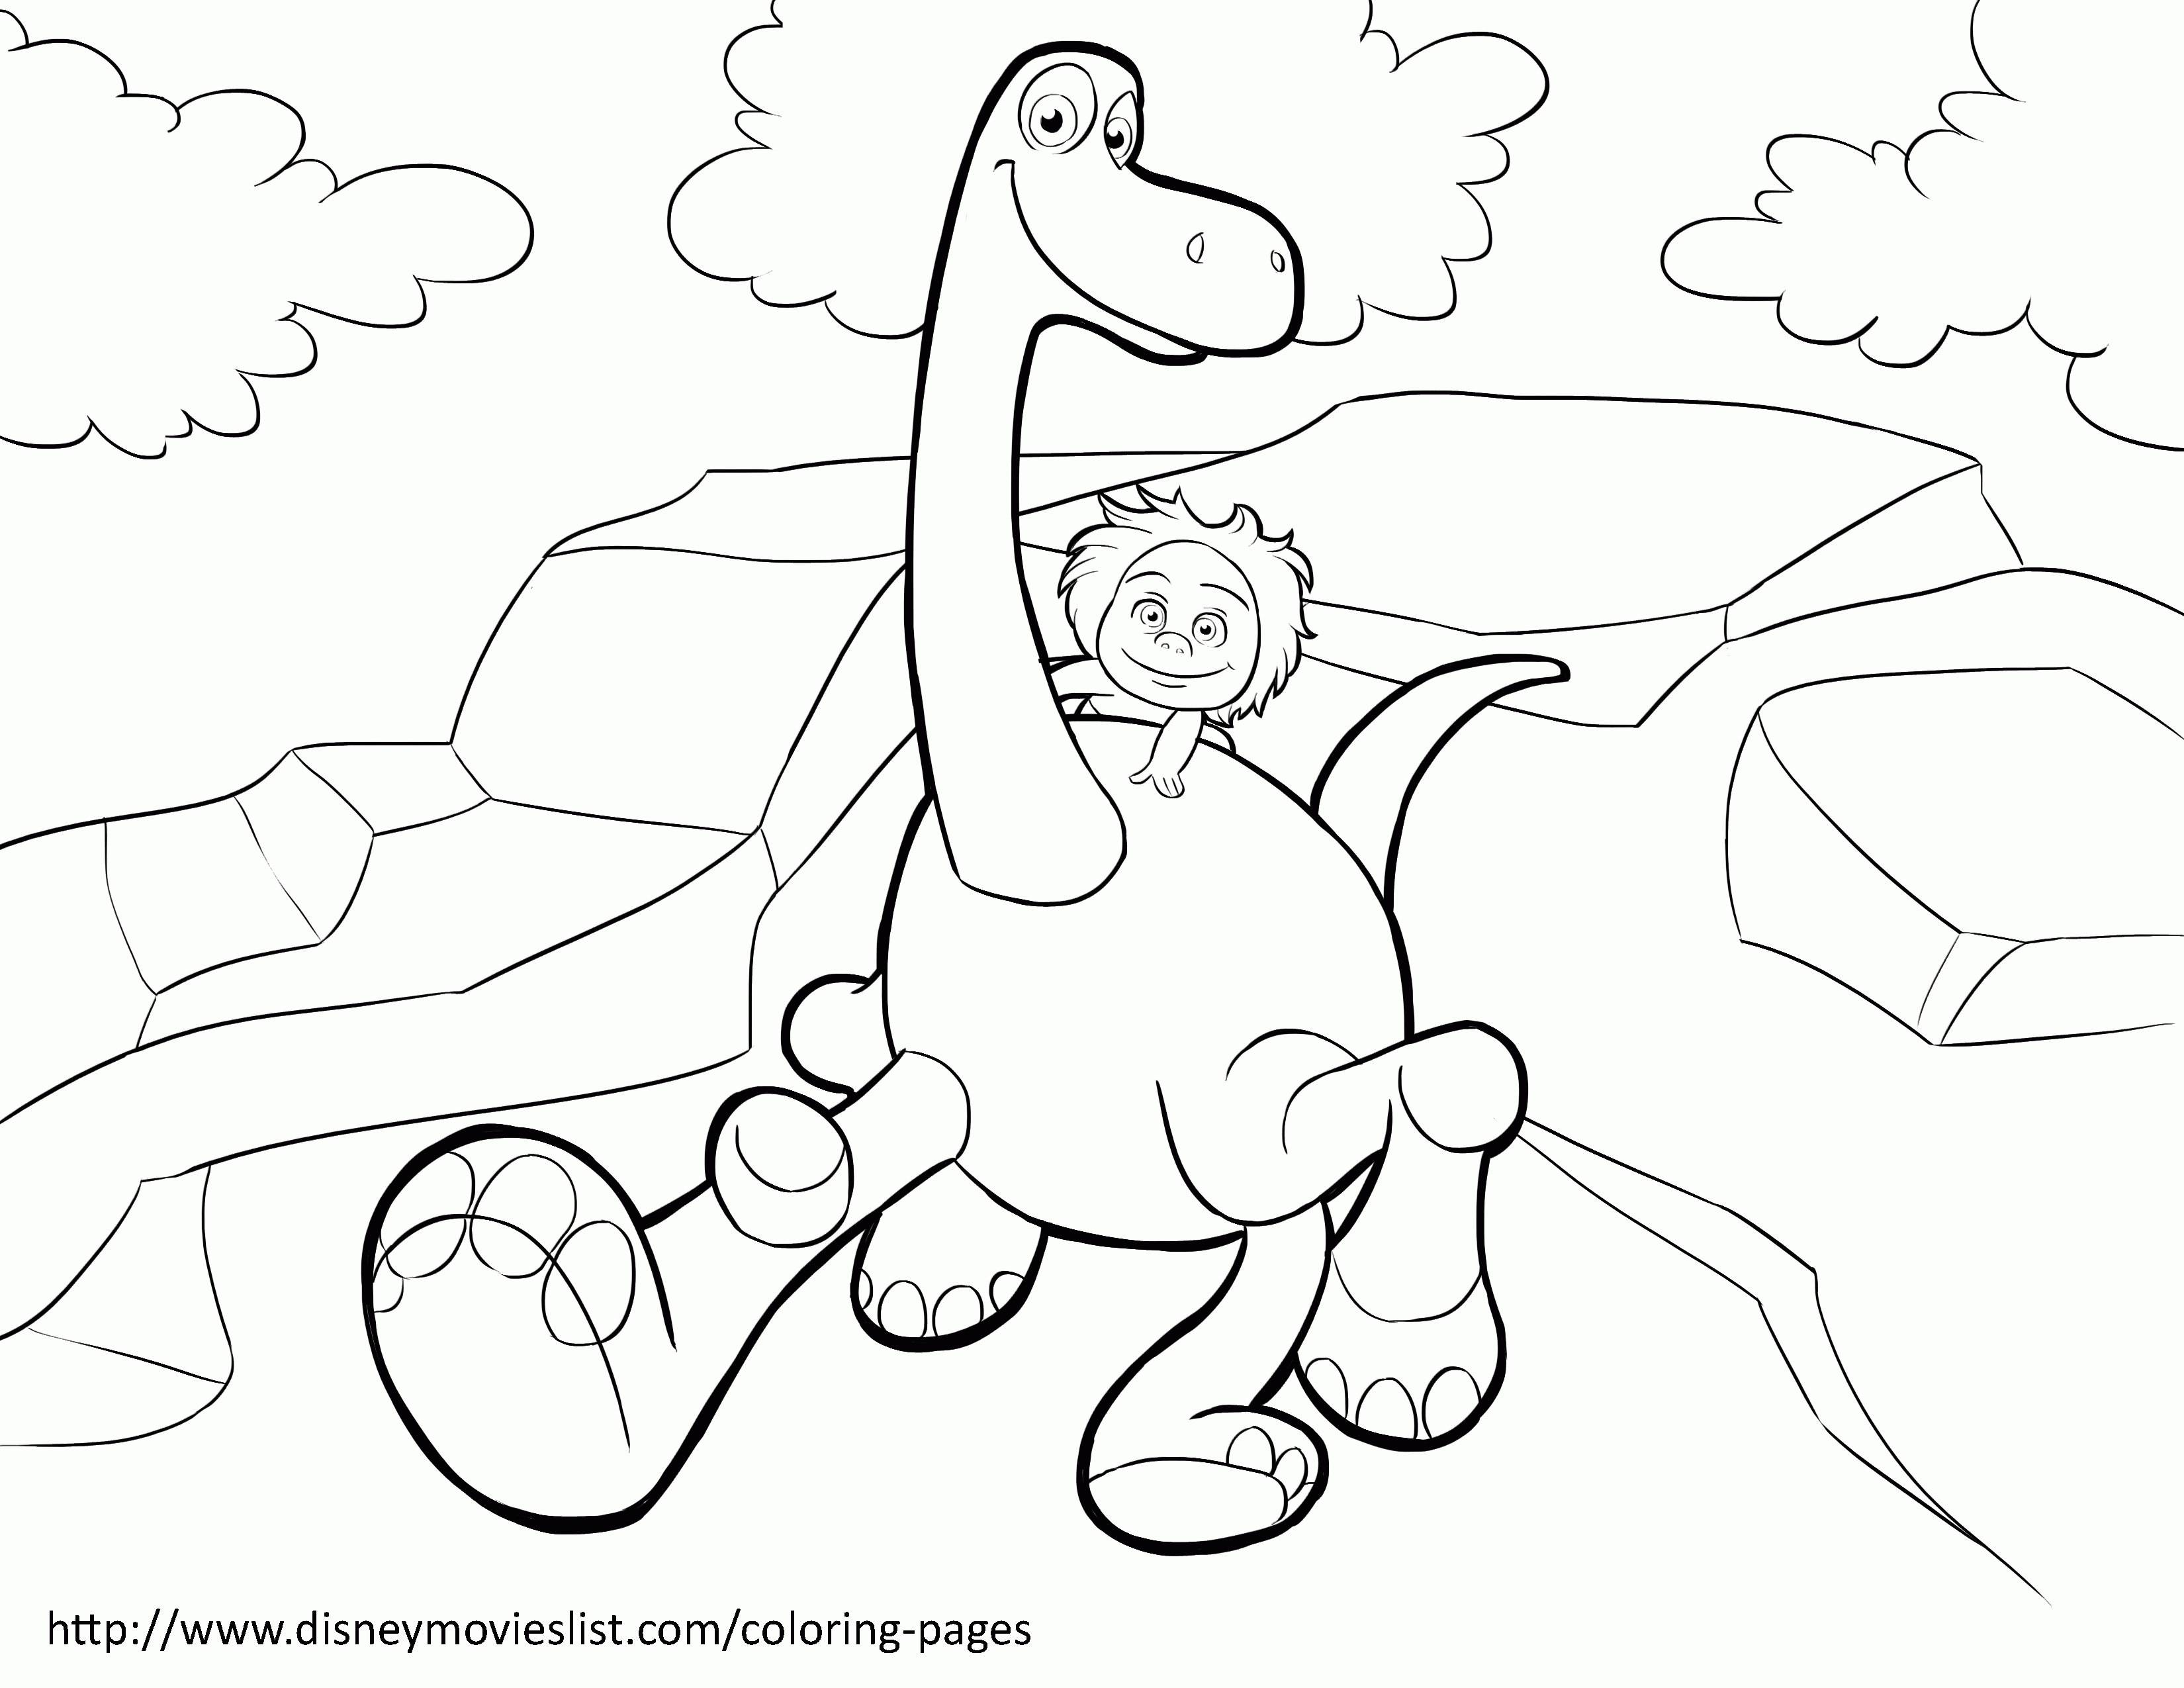 Download Disney Dinosaur Coloring Pages - Coloring Home